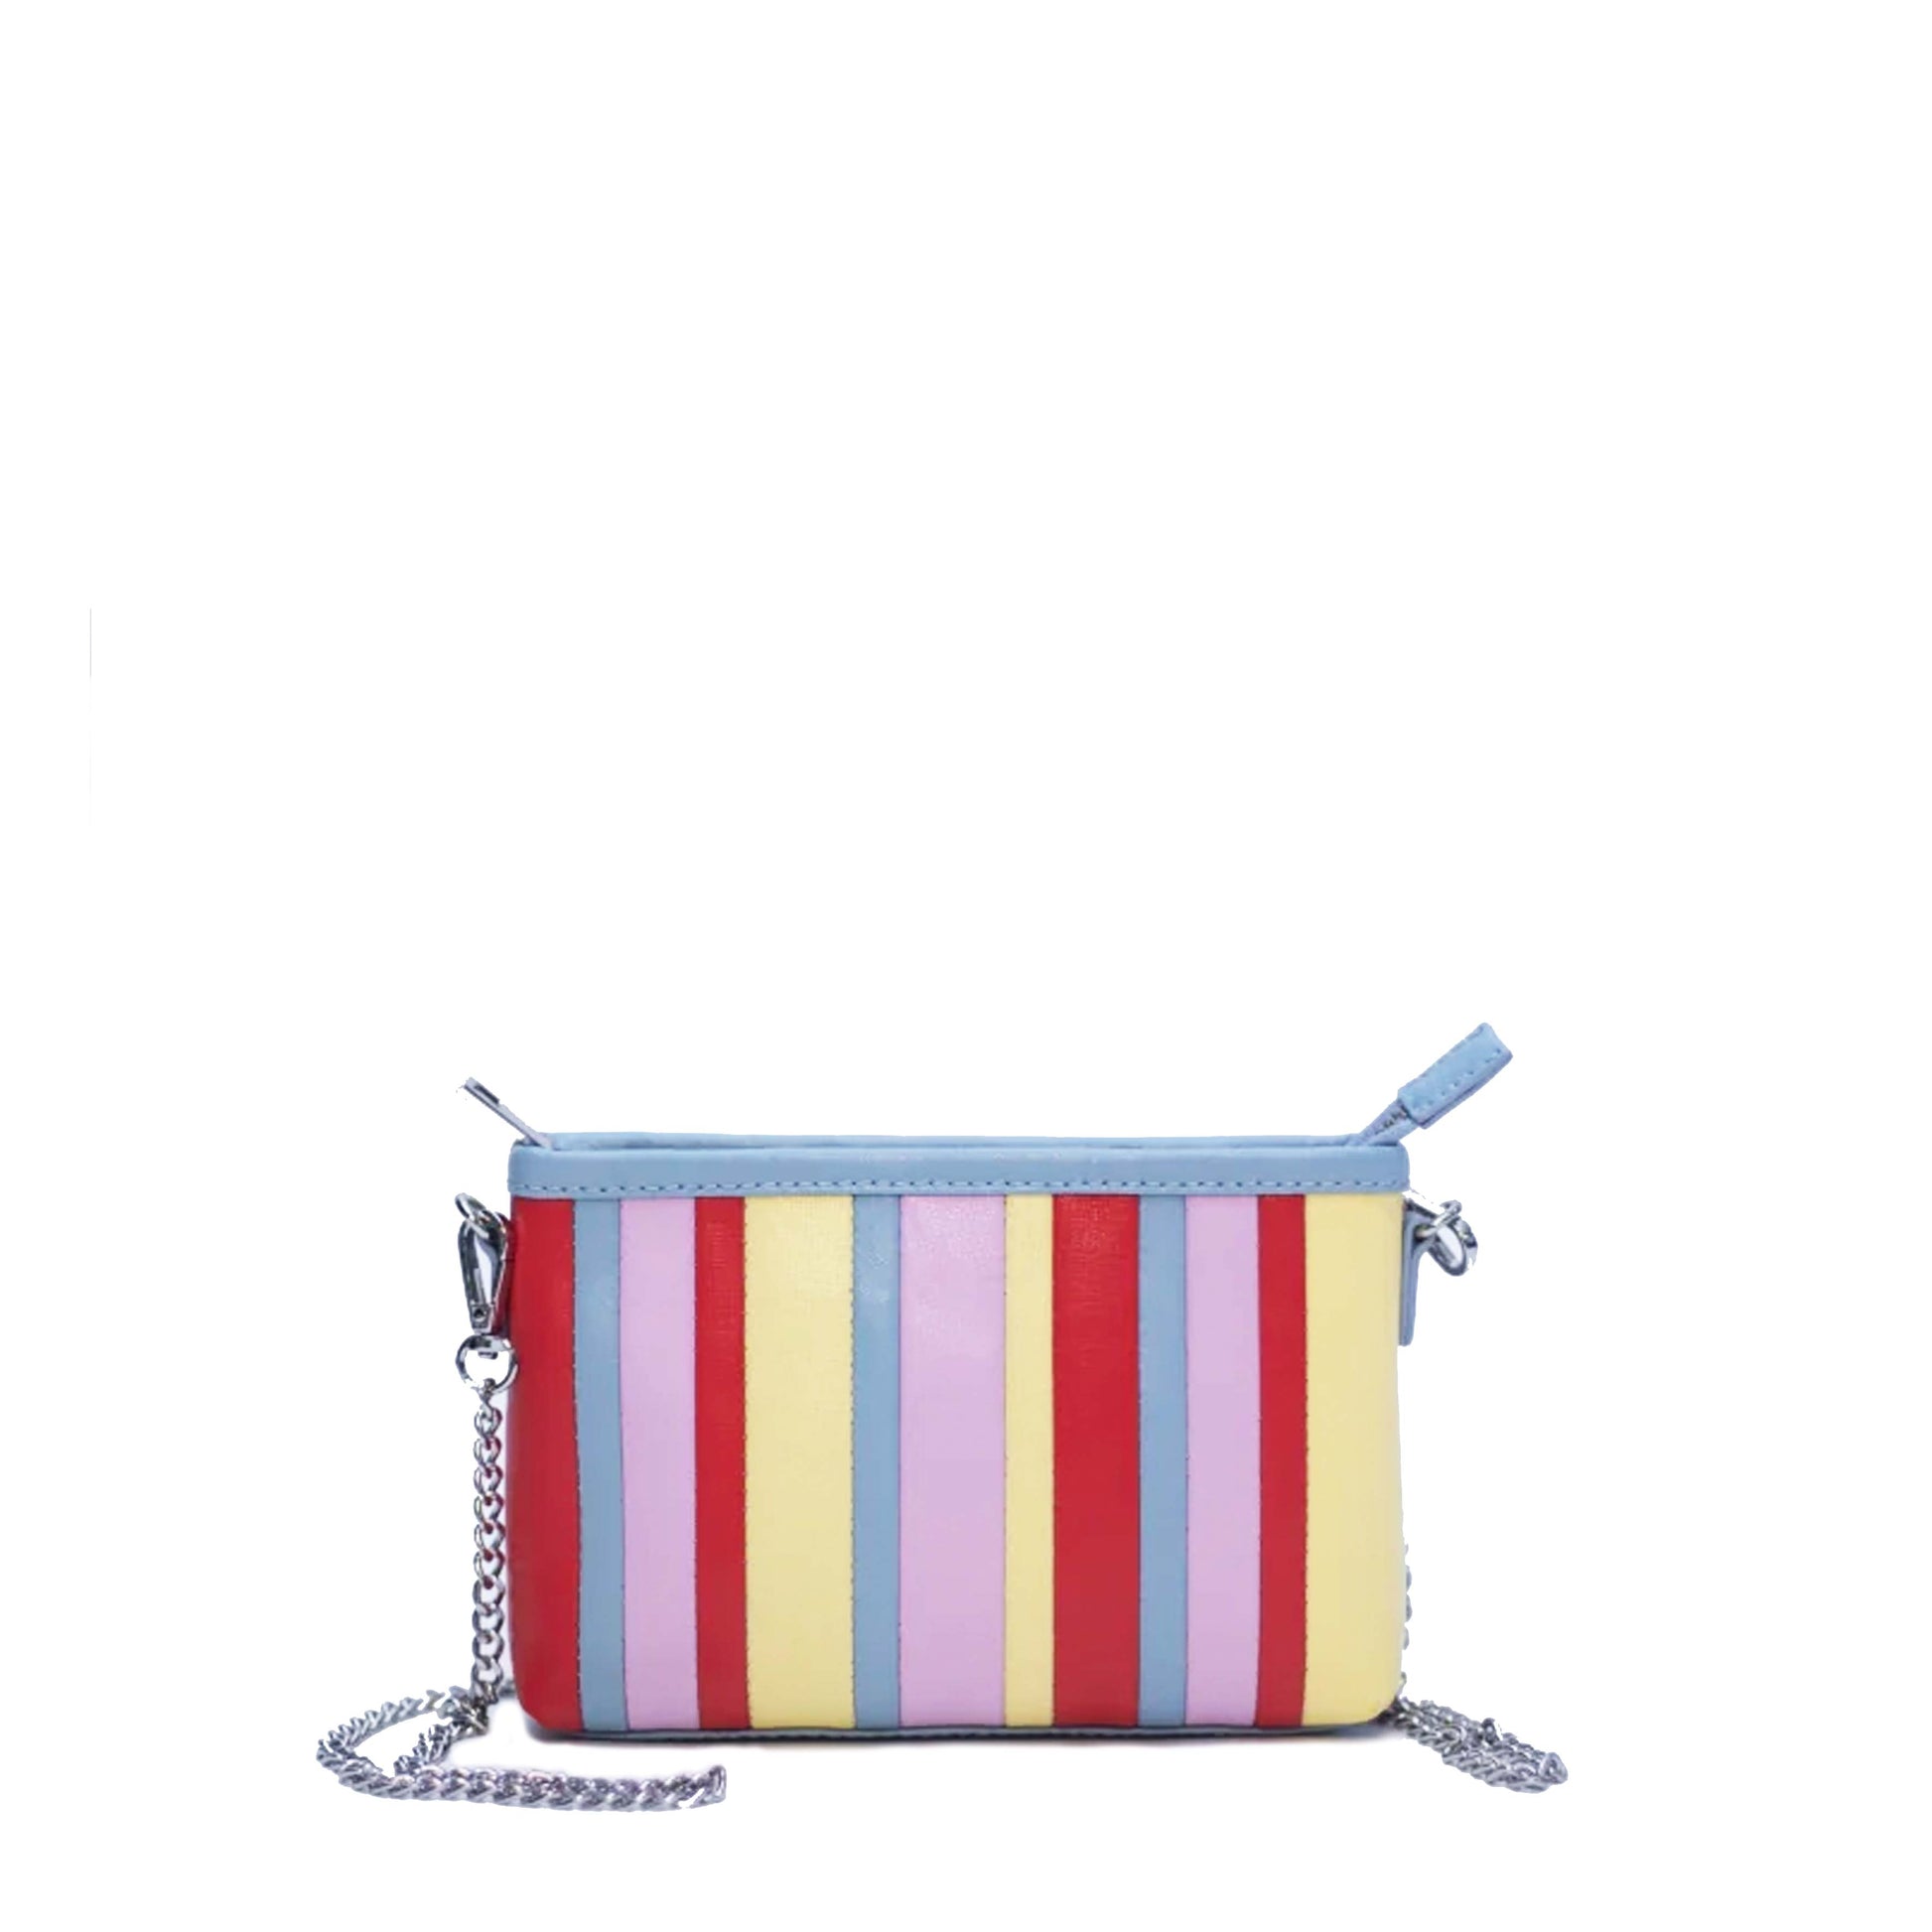 Núnoo Small Clutch Patchwork florence mix Small bag